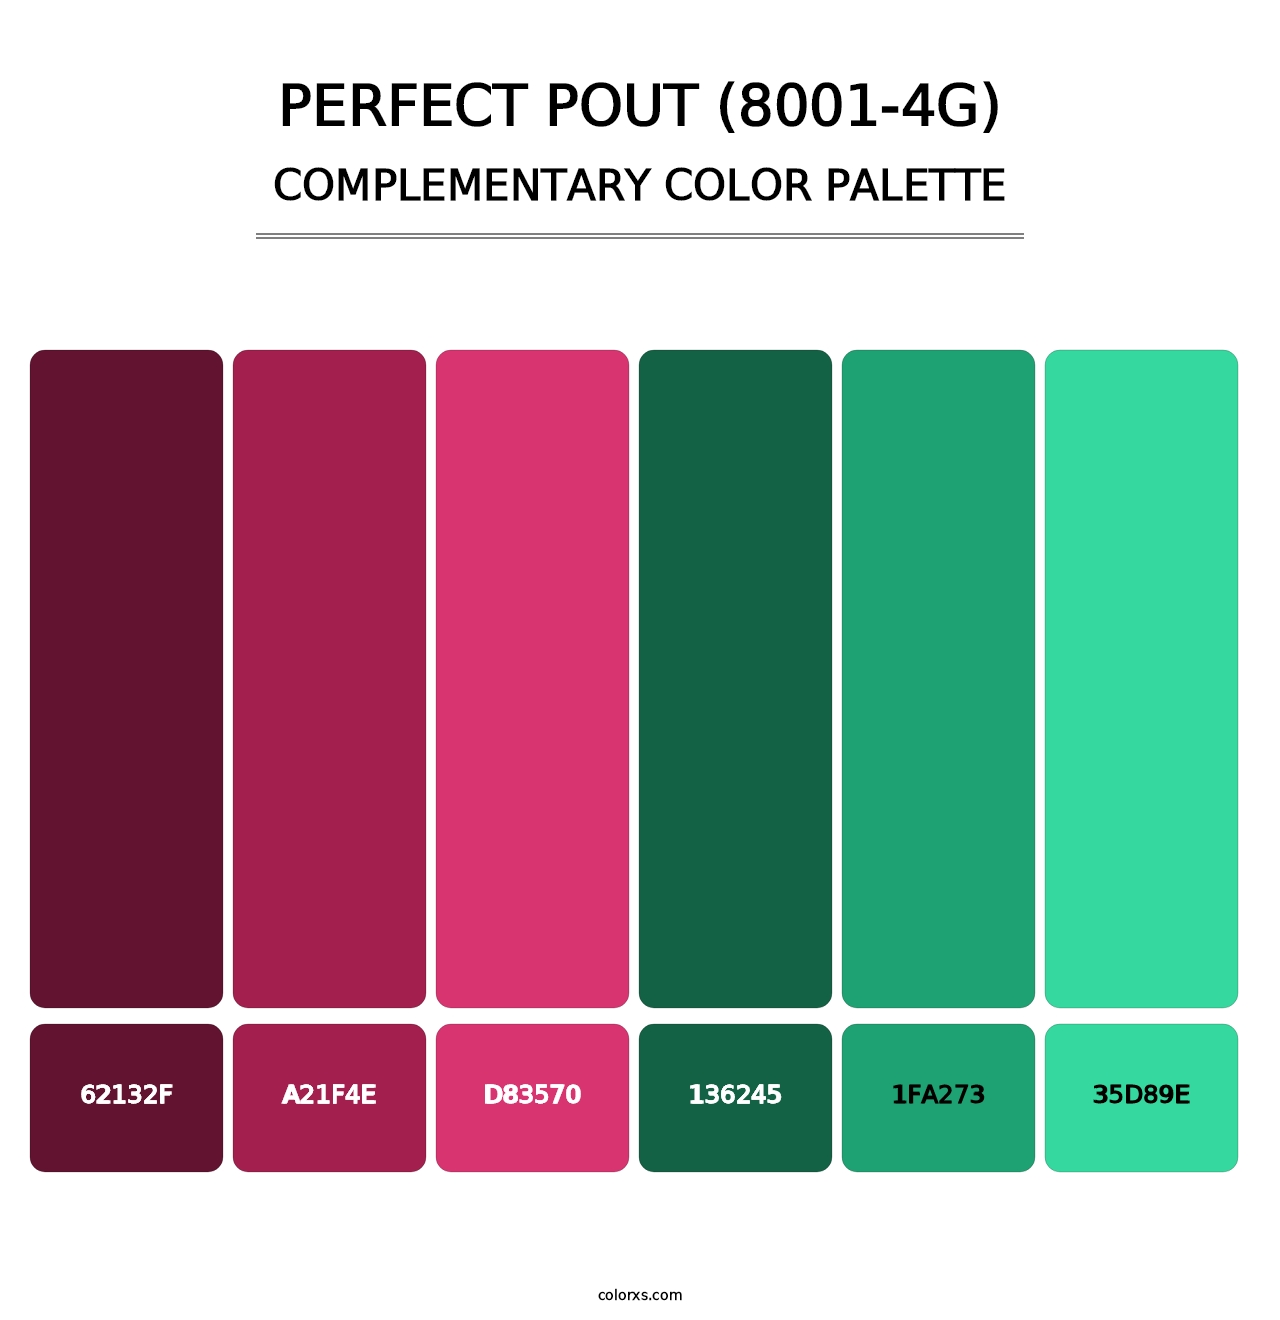 Perfect Pout (8001-4G) - Complementary Color Palette